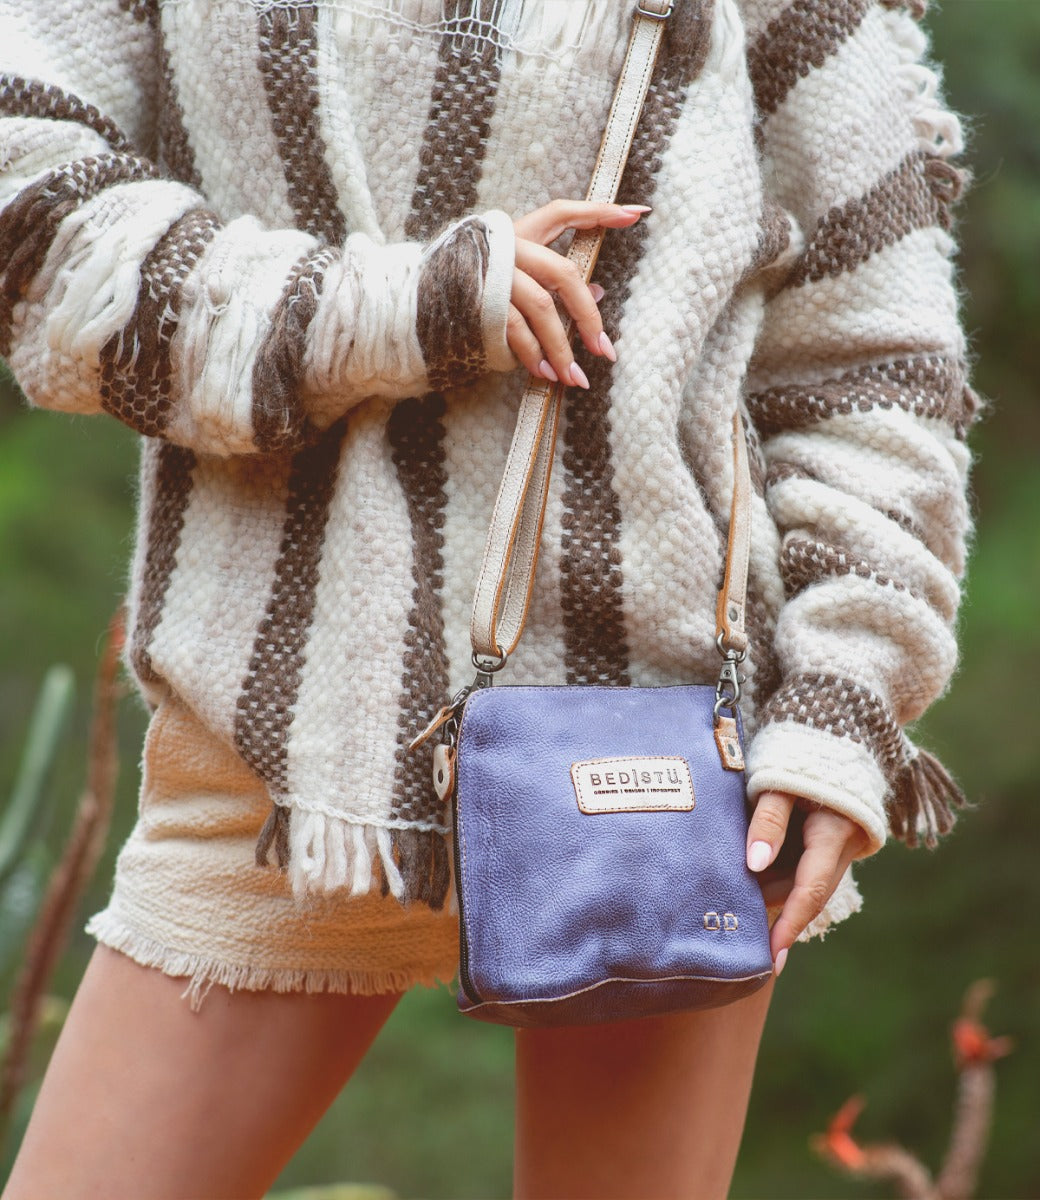 A woman wearing a Ventura sweater and Bed Stu striped sweater holding a purse.